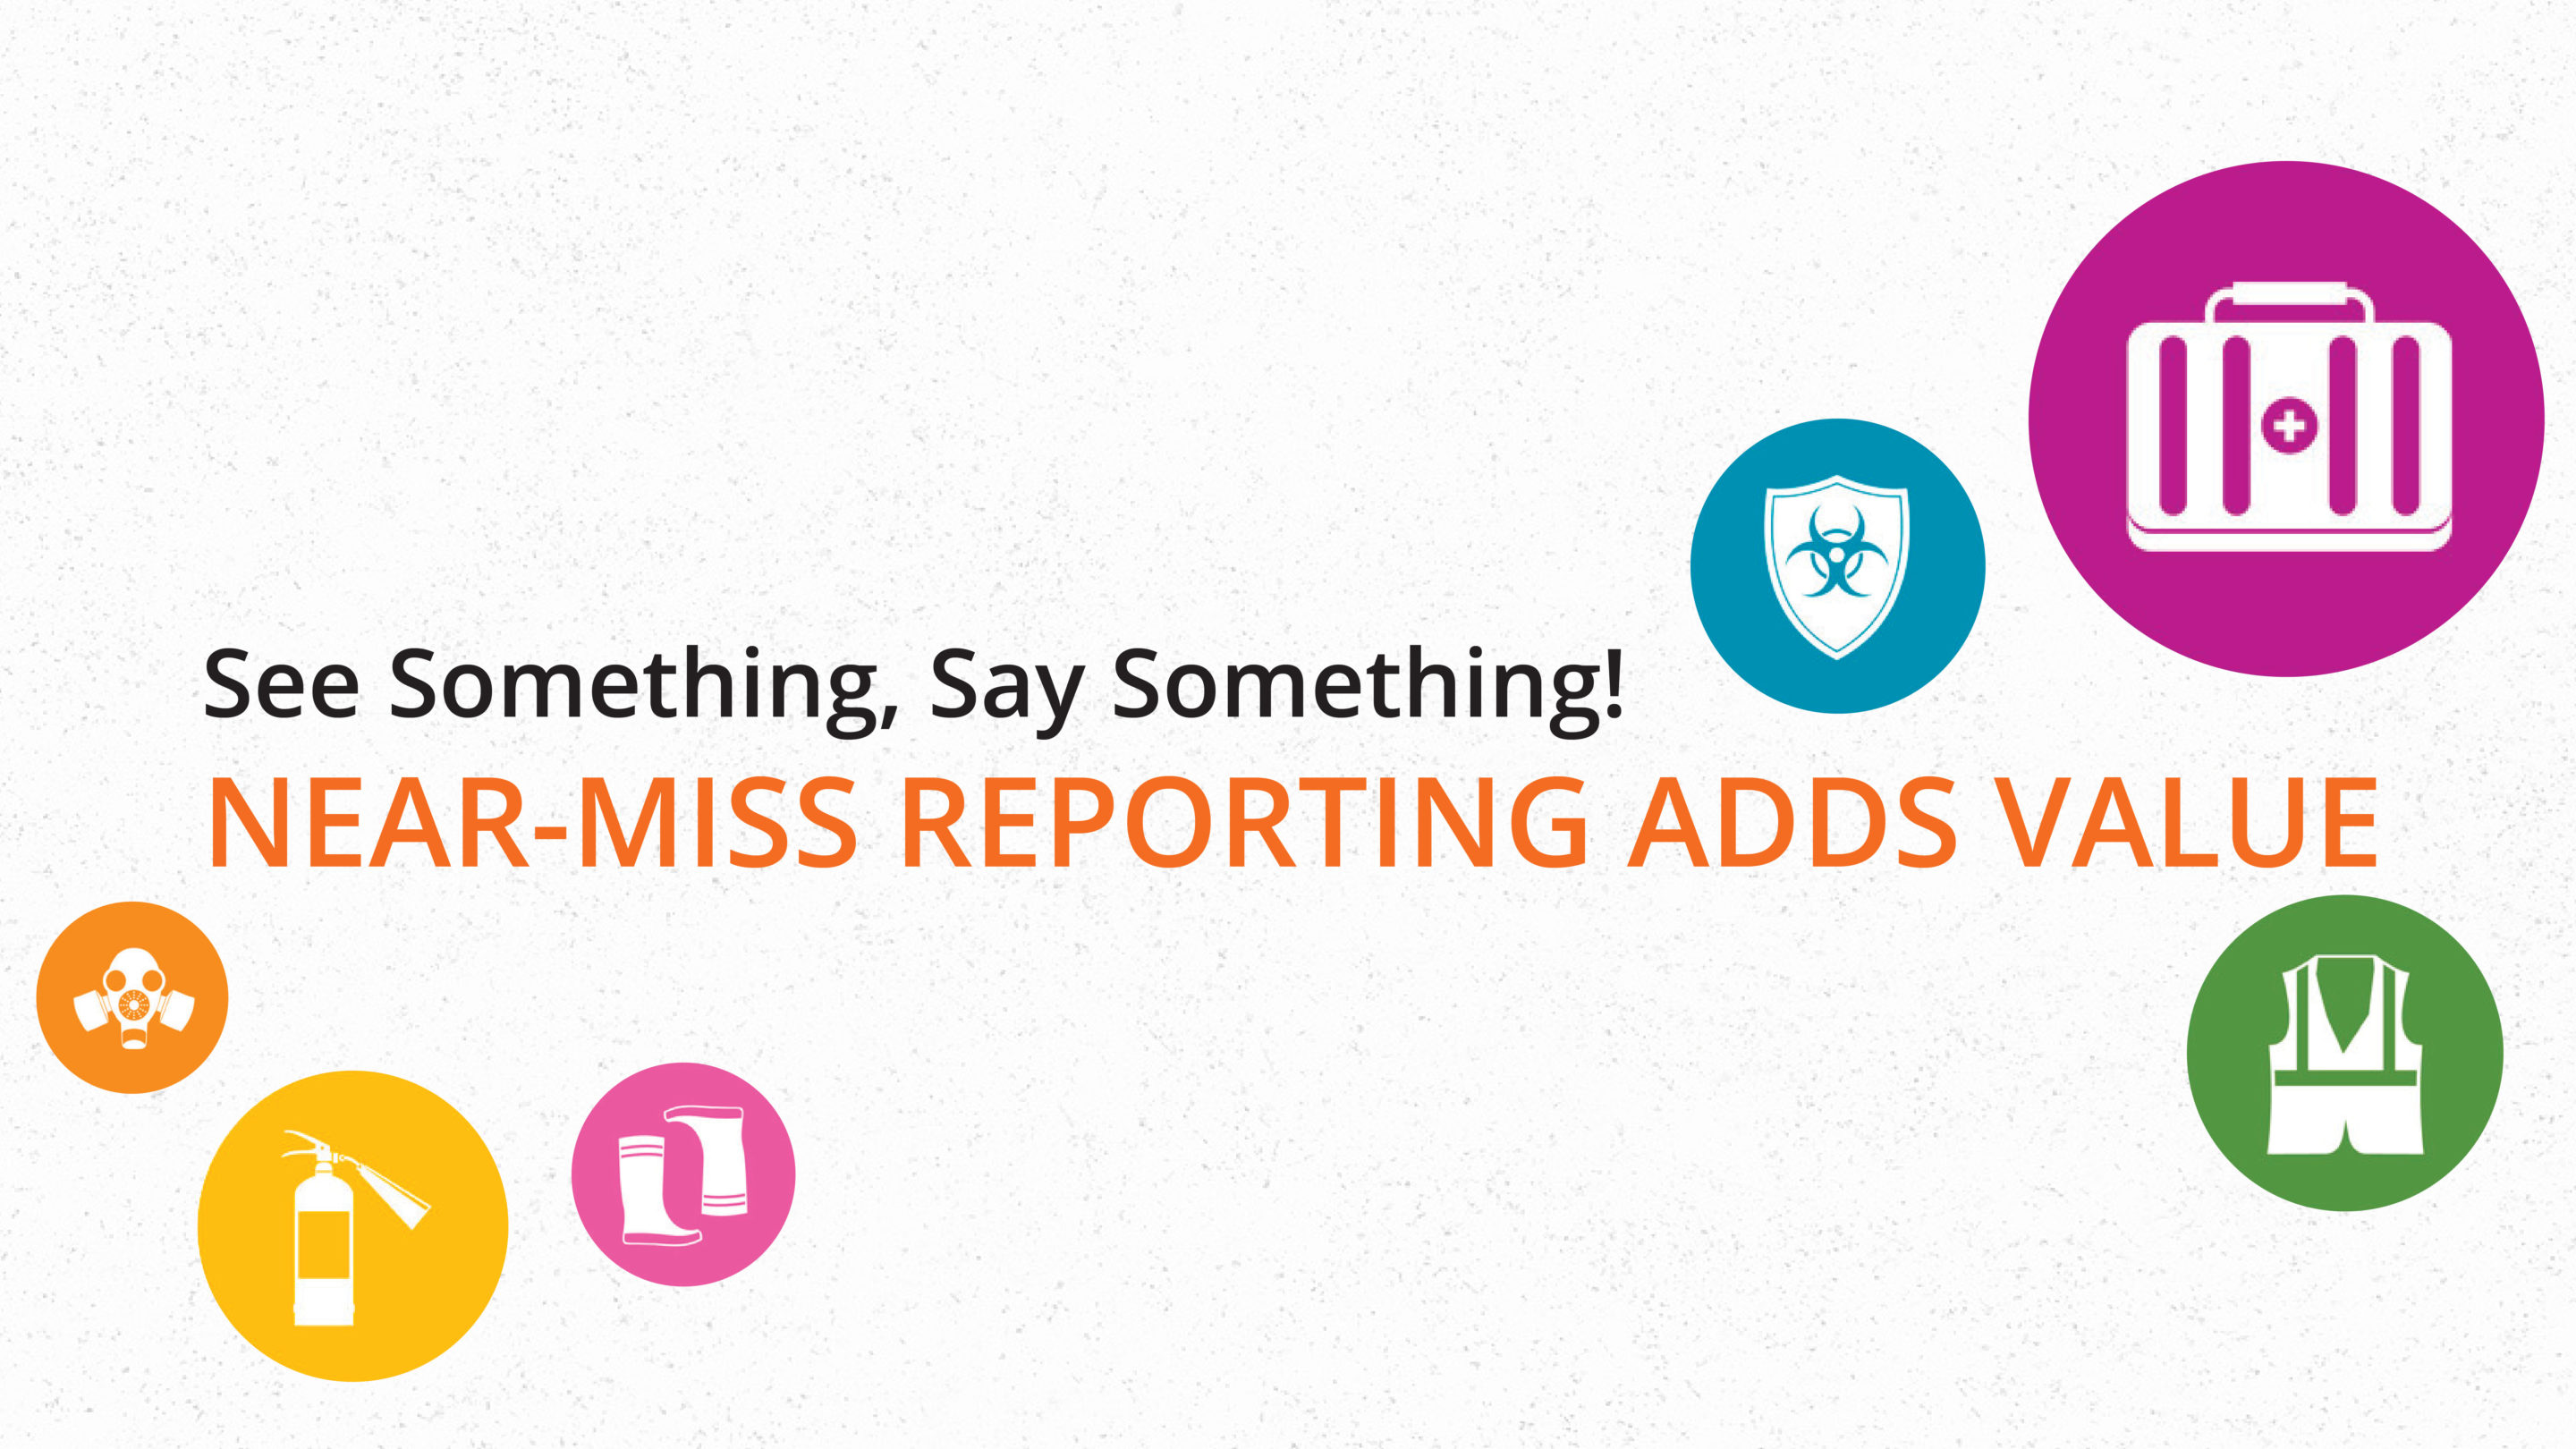 See Something, Say Something! Near-Miss Reporting Adds Value